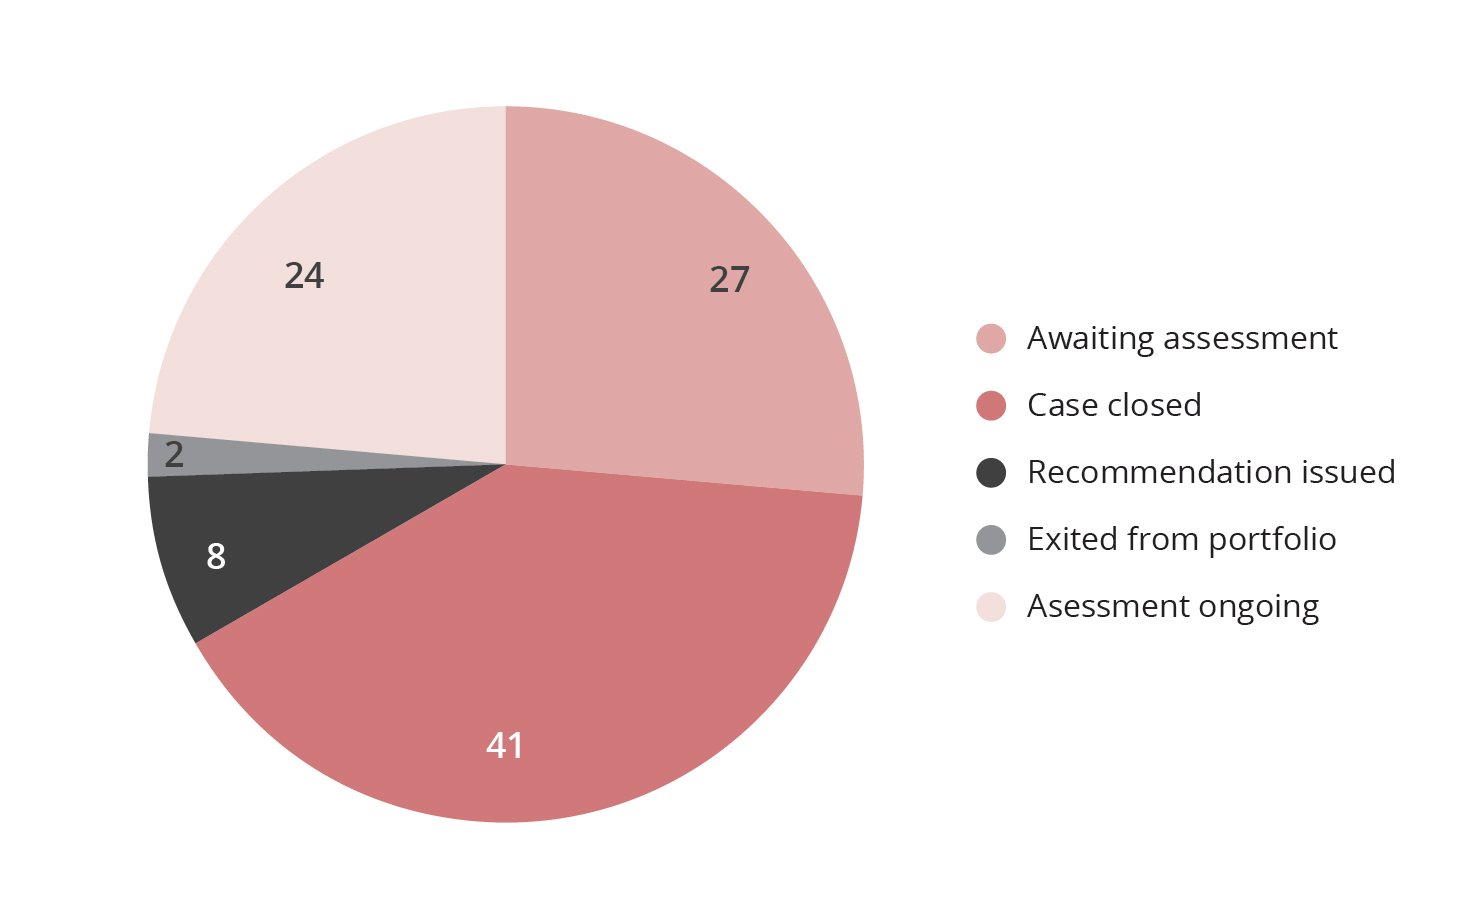 The distribution shows the investigation status for new cases from 2023.